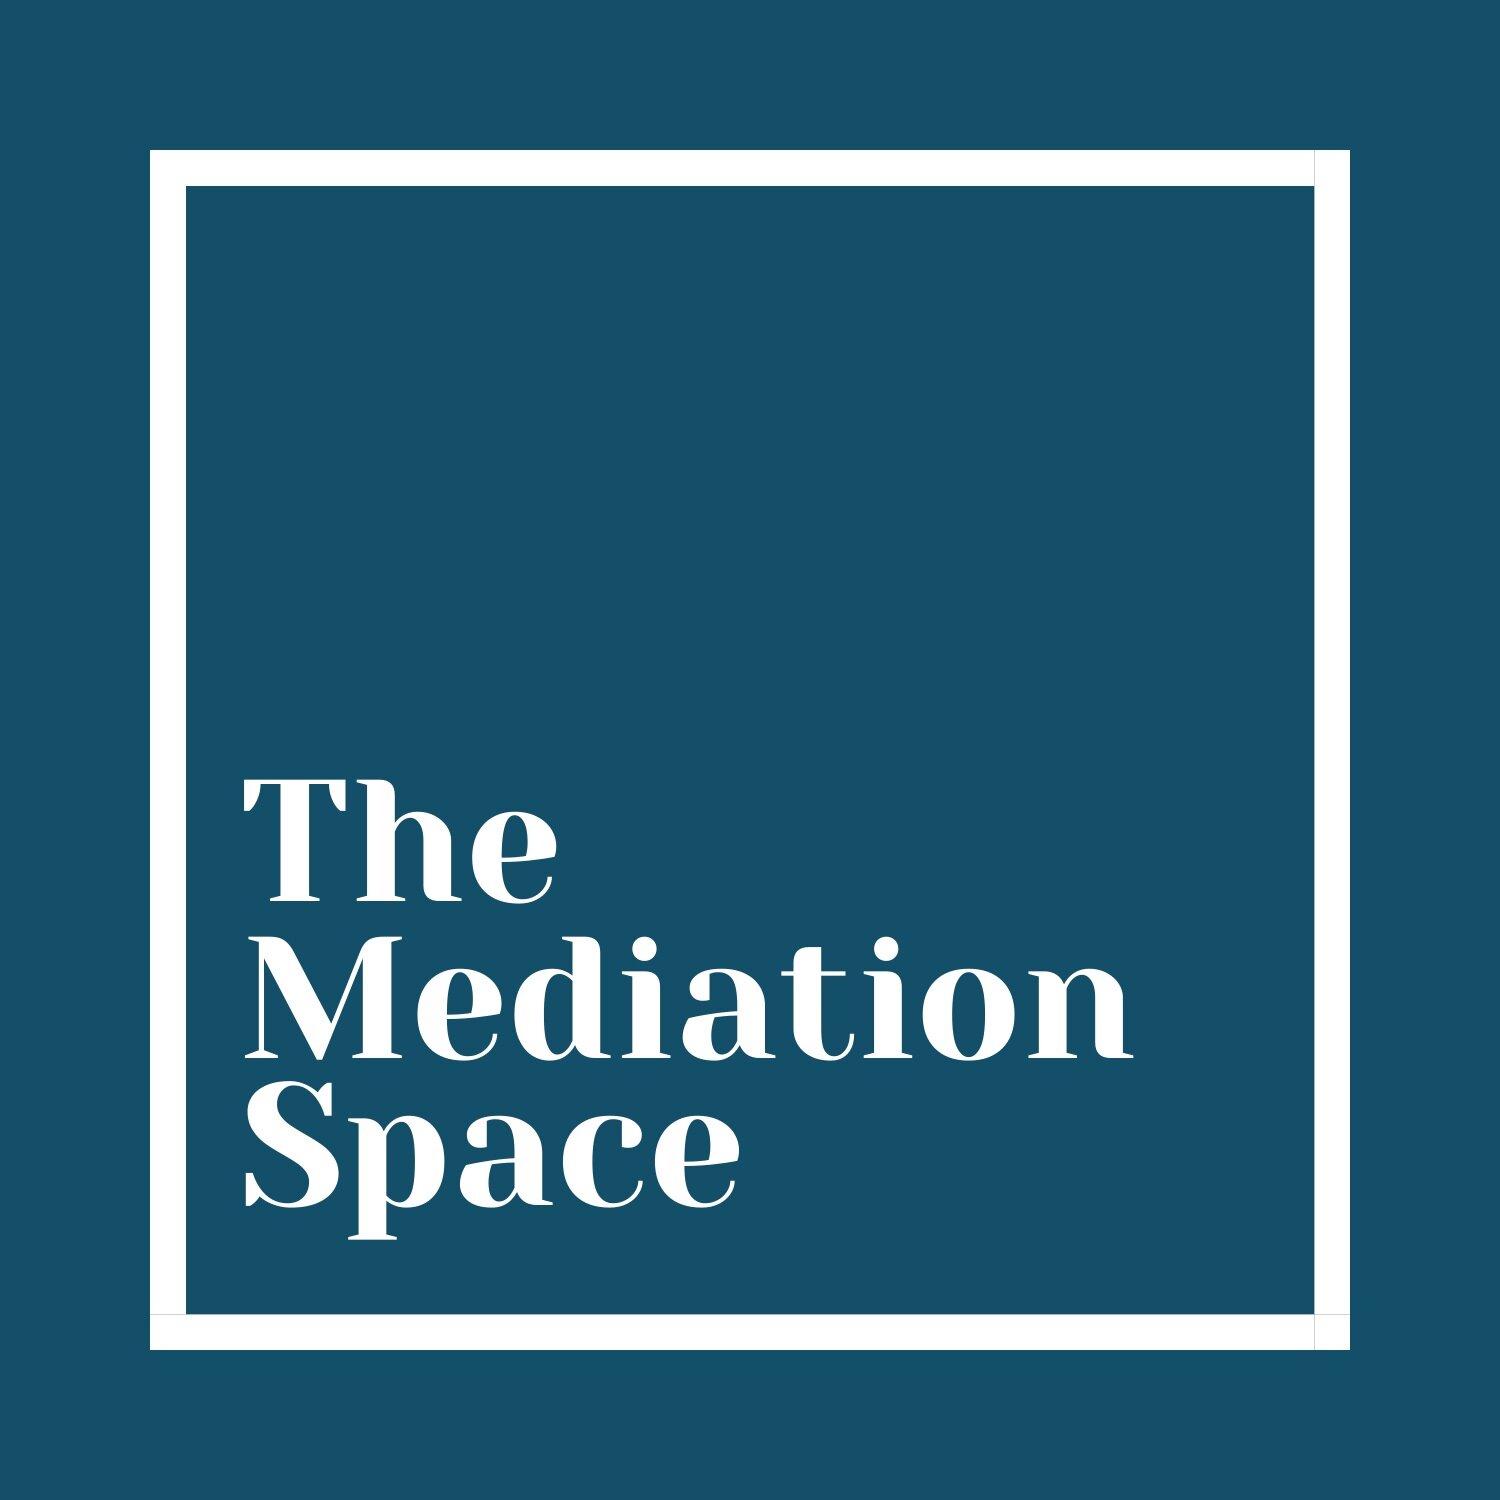 The Mediation Space LLP